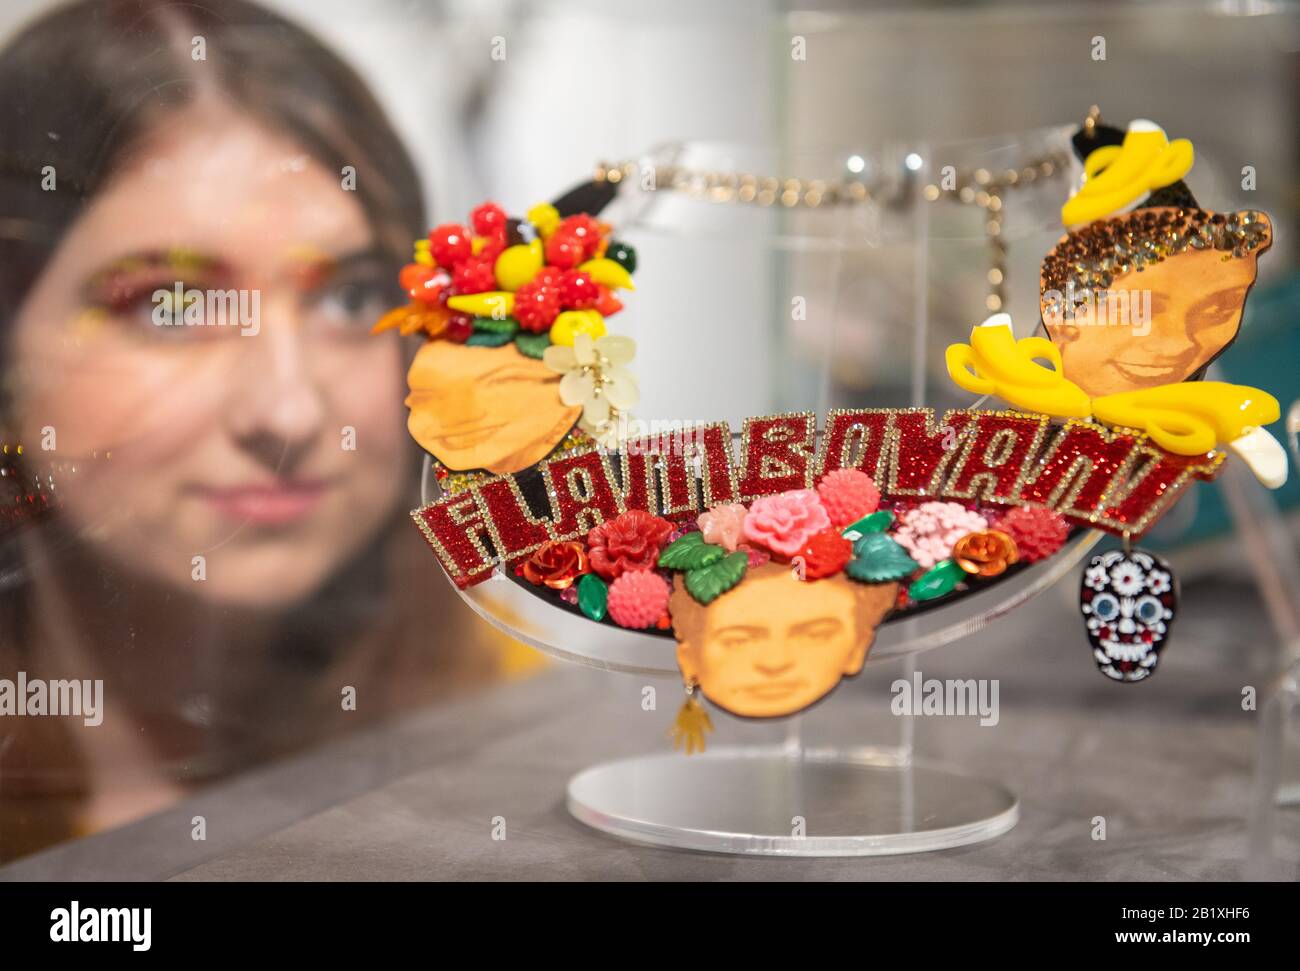 Ruth Davies-Mourby views a Tatty Devine laser-cut acrylic Flamboyant necklace, part of the 'Misshapes: the Making of Tatty Devine' exhibition, which features over 100 pieces from 20 years of the iconic British jewellery brand, at the Stephen Lawrence Gallery in London. Stock Photo